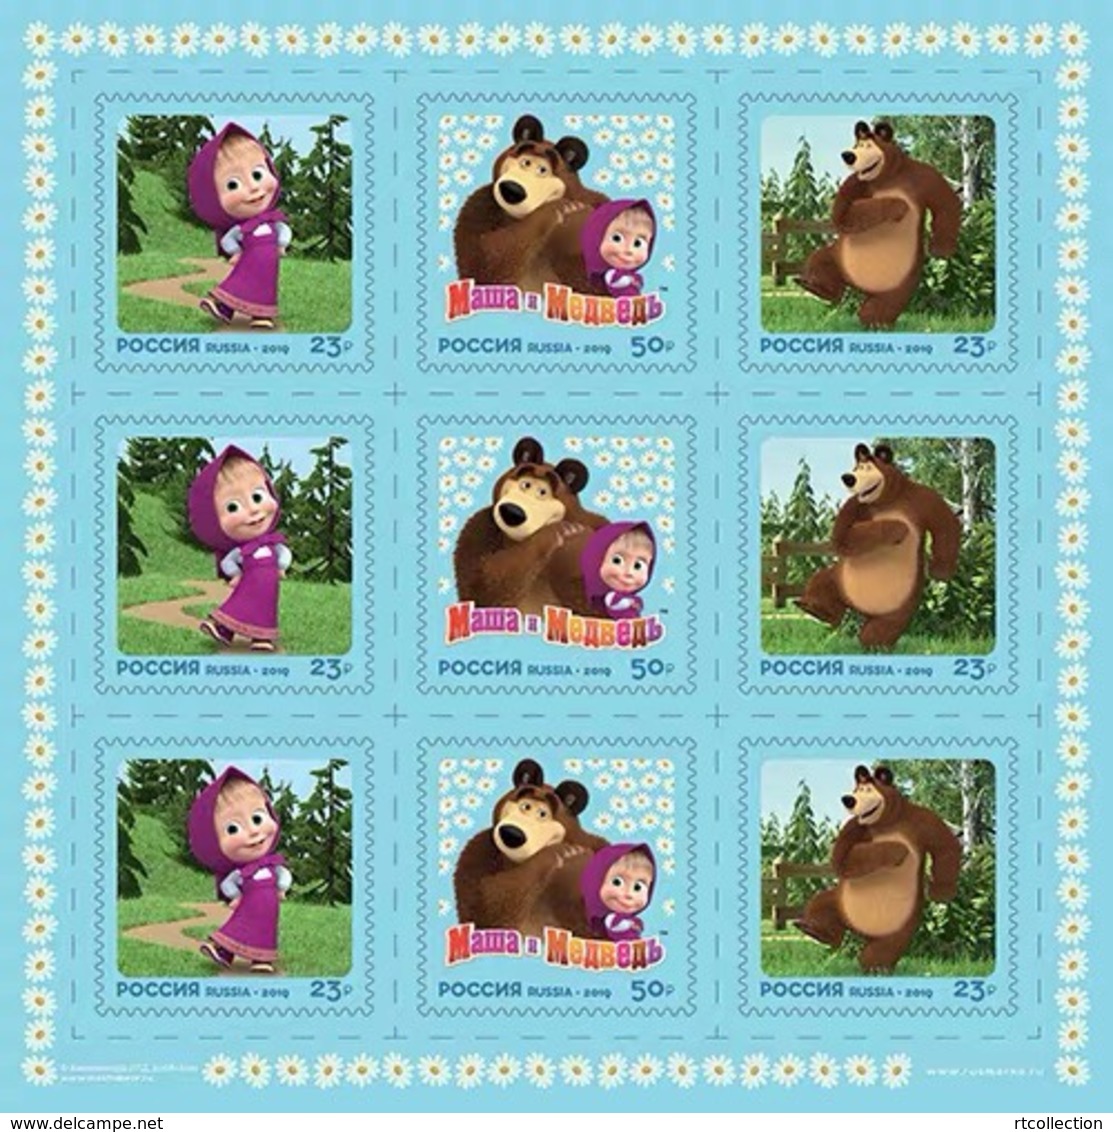 Russia 2019 Sheet Russian Contemporary Animation Cartoon Cinema Film Art Masha And The Bear Animals Bears Stamps MNH - Unused Stamps